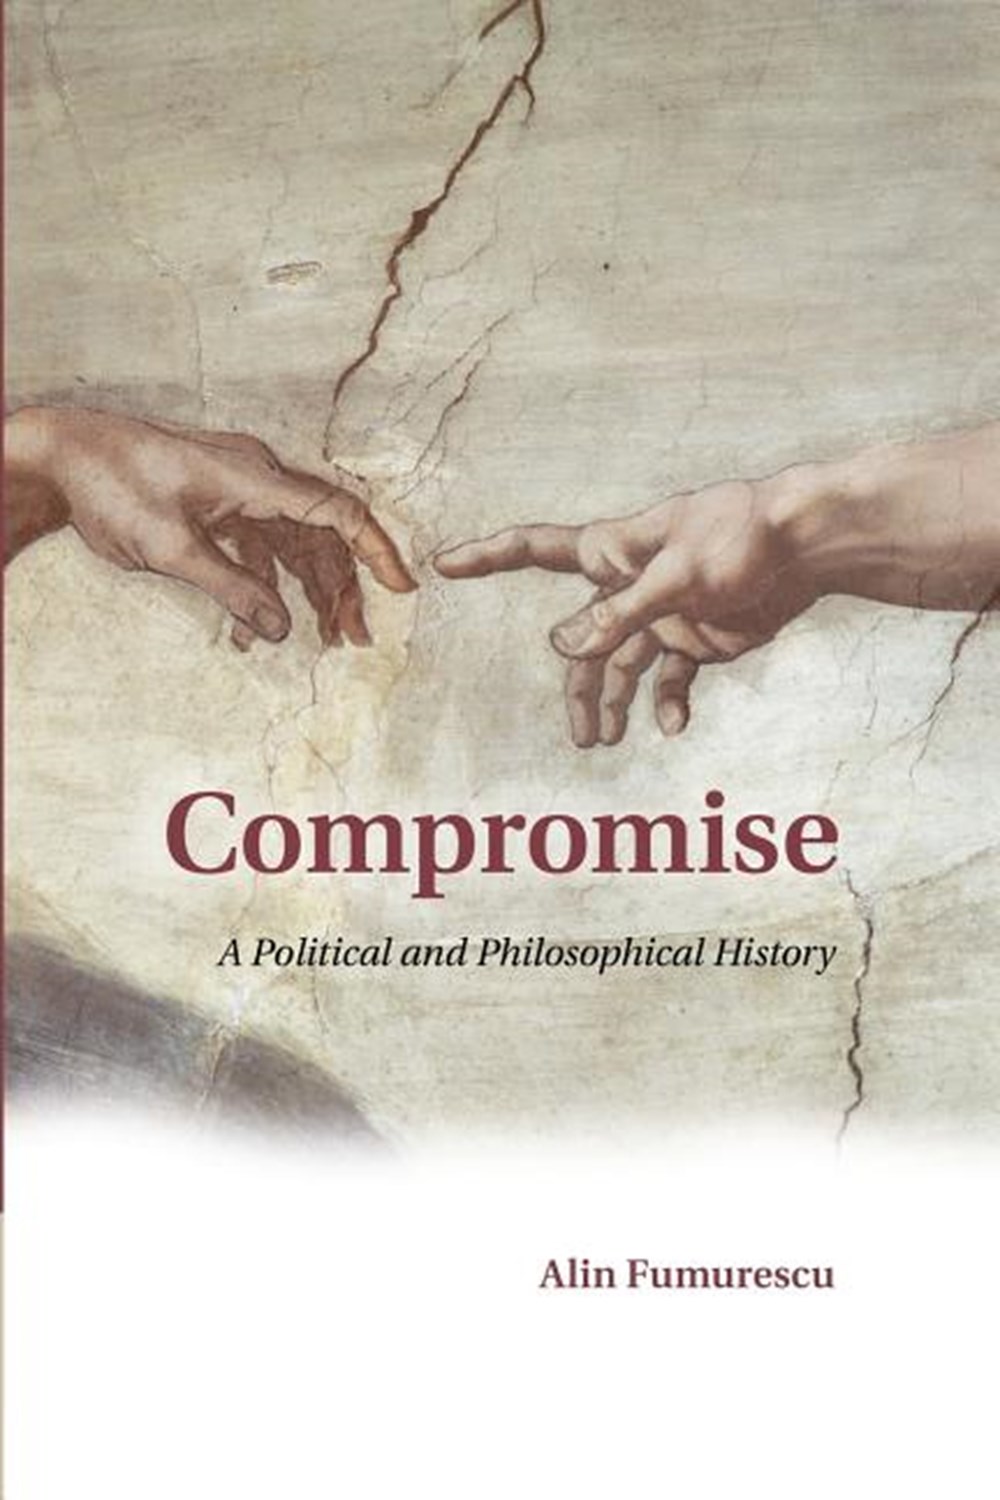 Compromise: A Political and Philosophical History